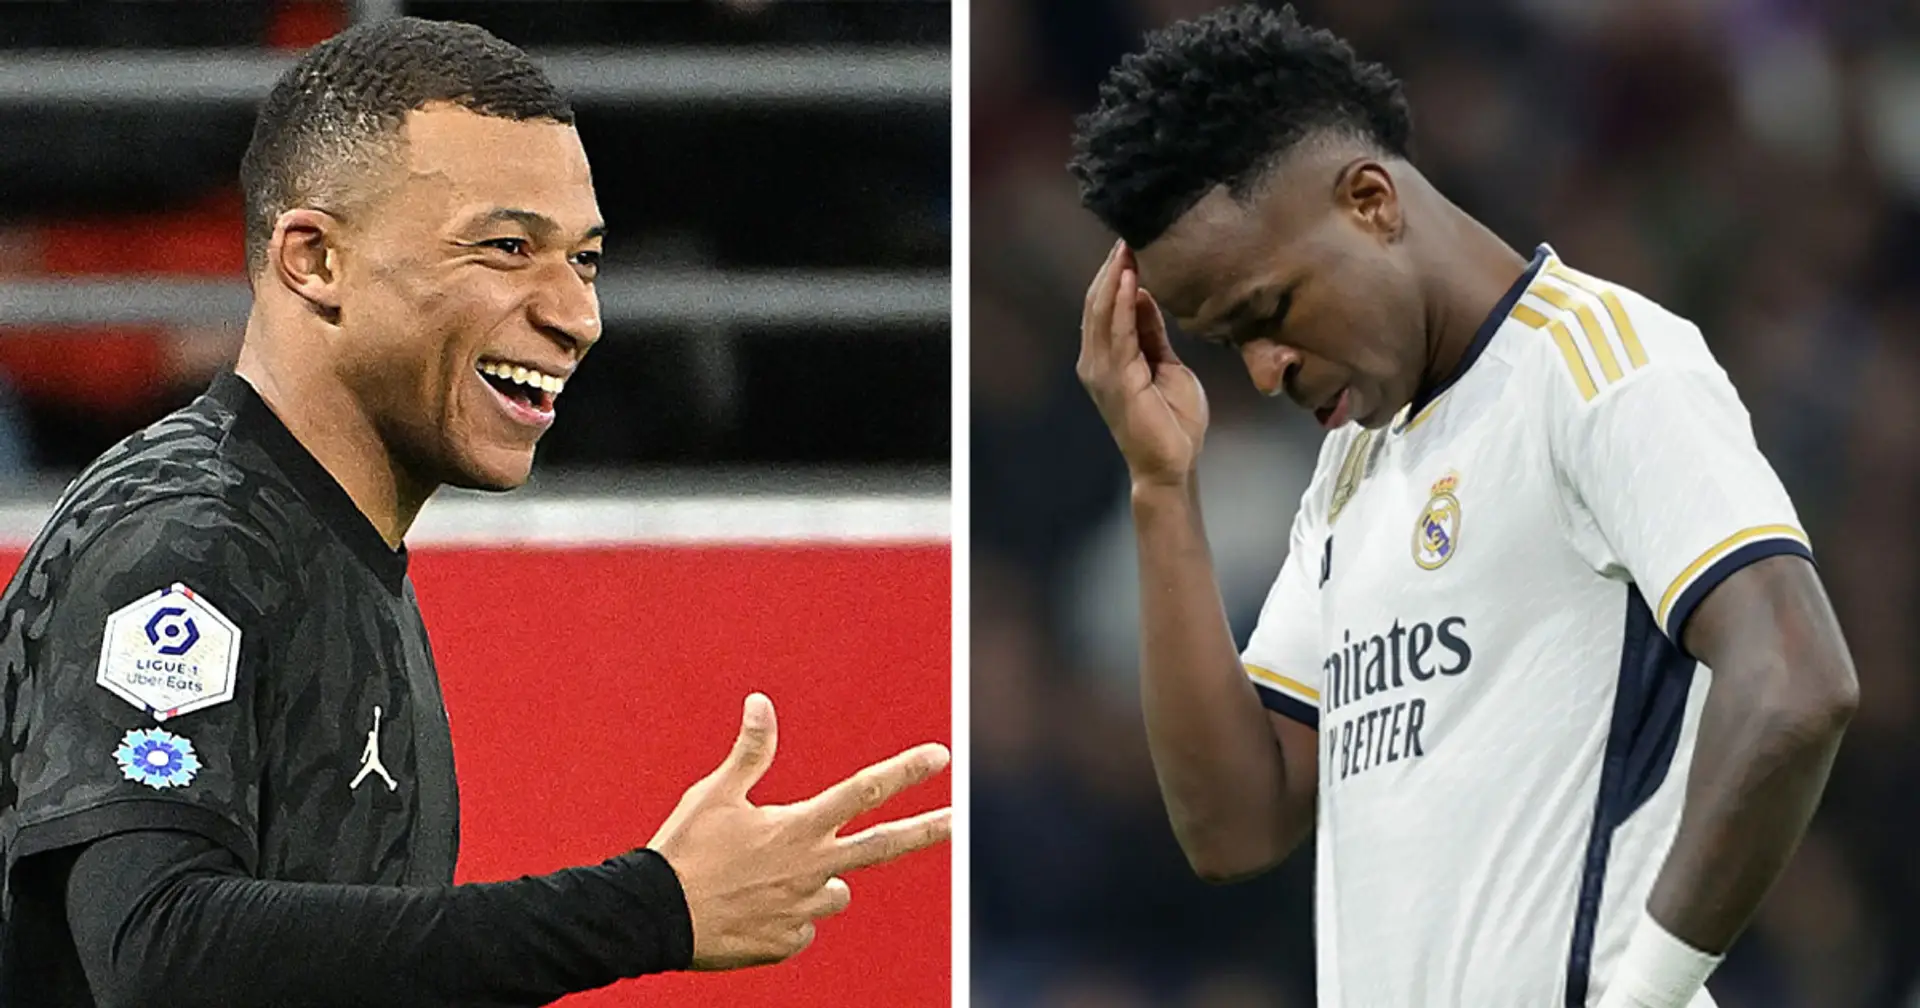 "Mbappe will make Vini leave just like Neymar" - fans worried Mbappe won't fit into the team